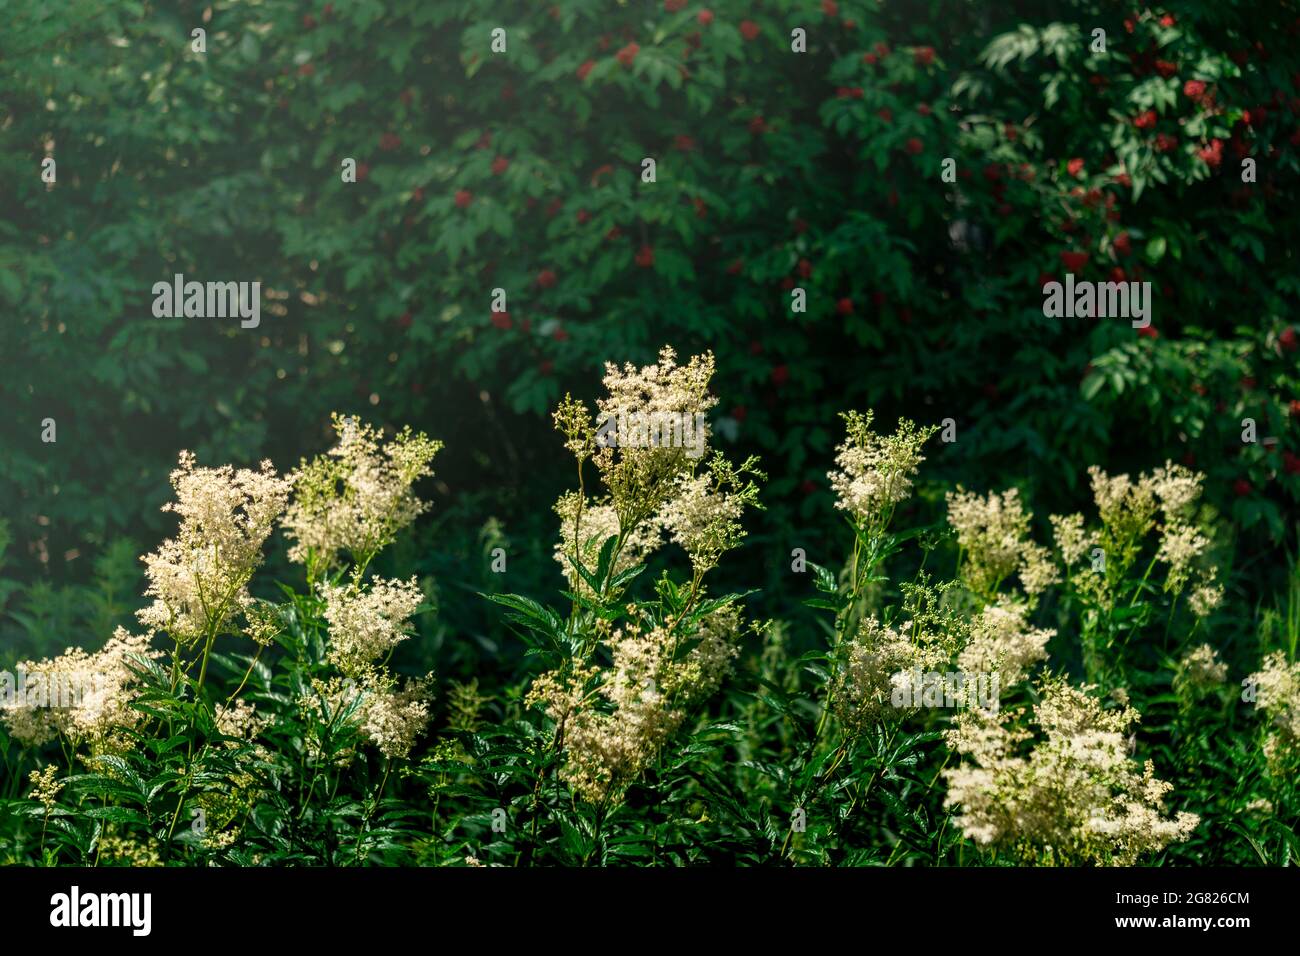 meadowsweet inflorescences are illuminated by the sun against the background of blurred shady foliage and berries Stock Photo